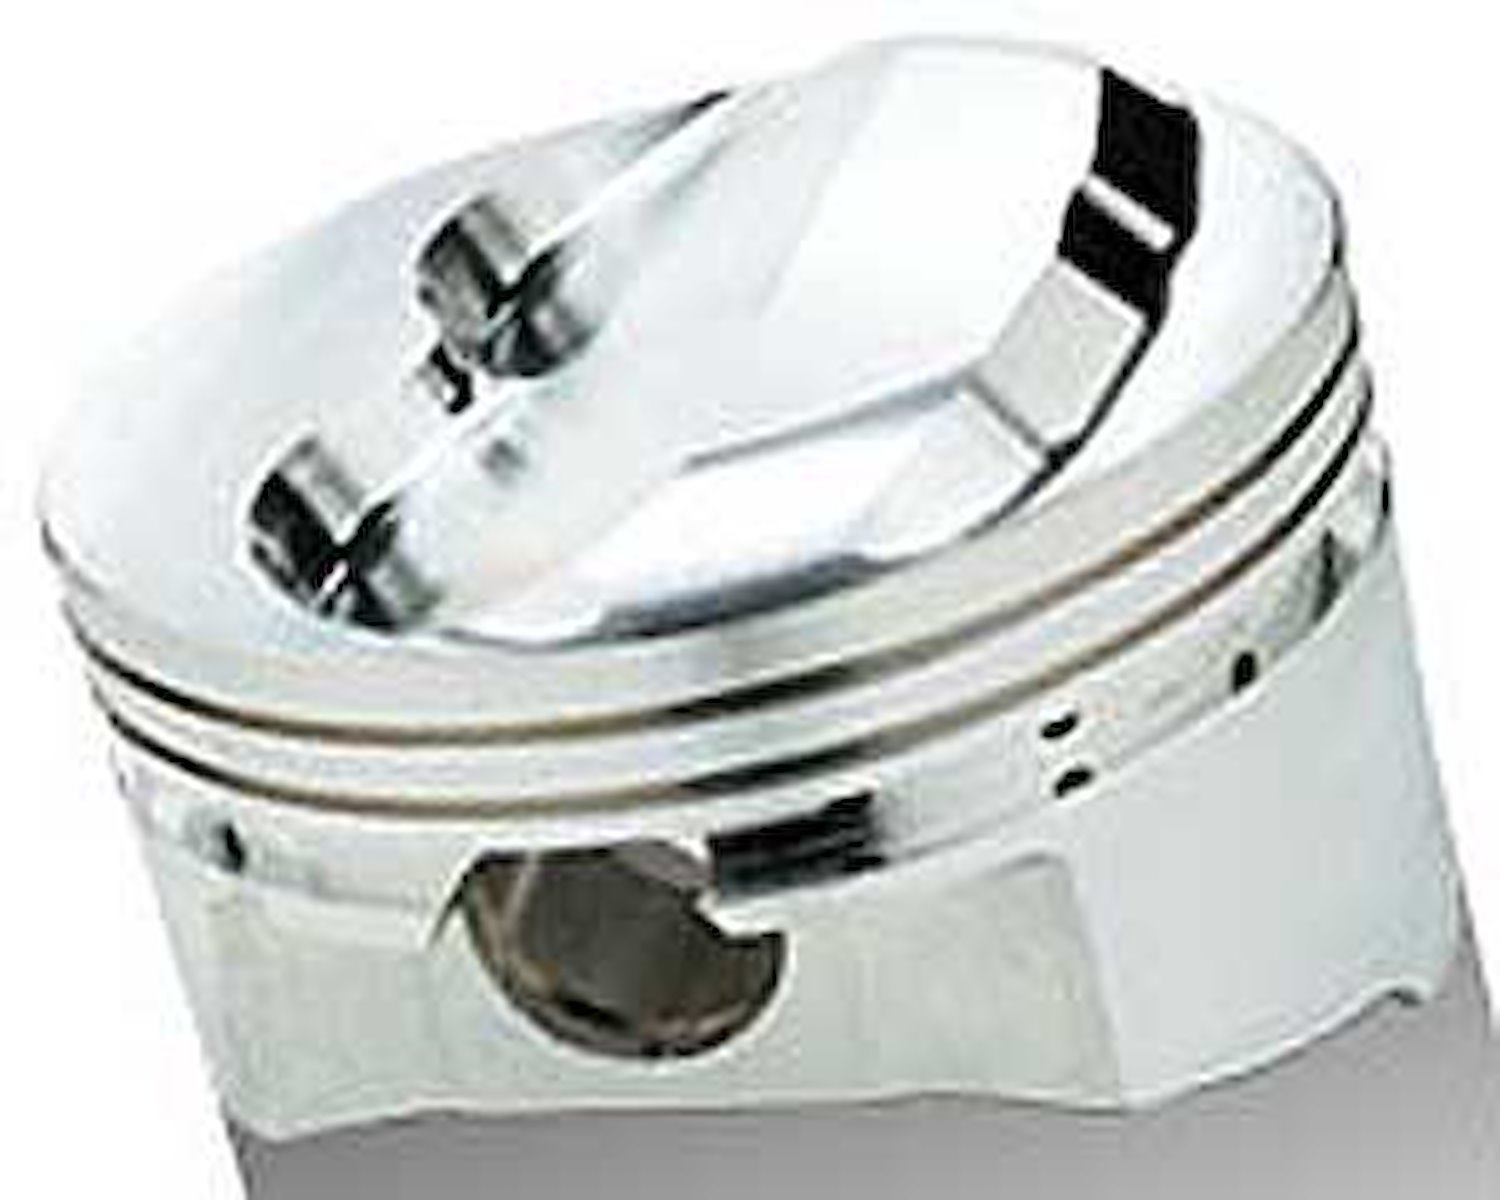 SRP Dome Pistons for Small Block Chevy Bore 400 4.125"